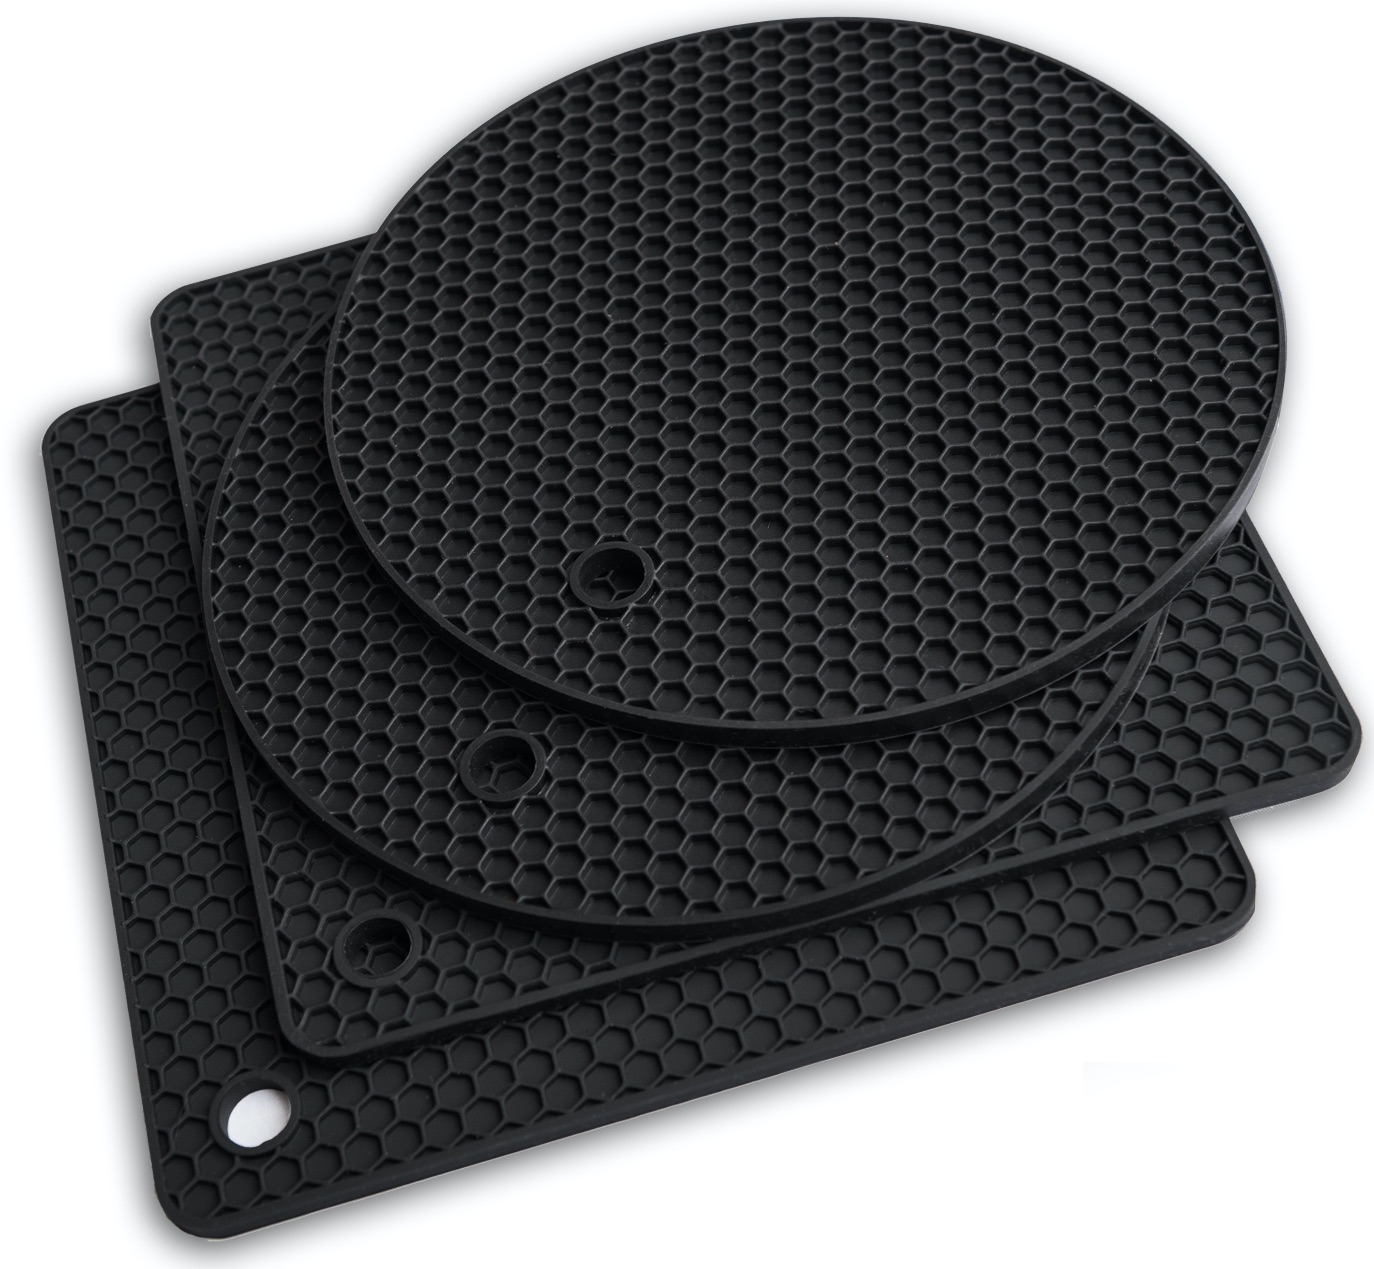 Silicone Trivet Mats – Pot Holders – Drying Mat Our potholders Kitchen  Tools is Heat Resistant to 440°F, Non-Slip Durable Flexible Easy to wash  and Dry and Contains 4 pcs Black by